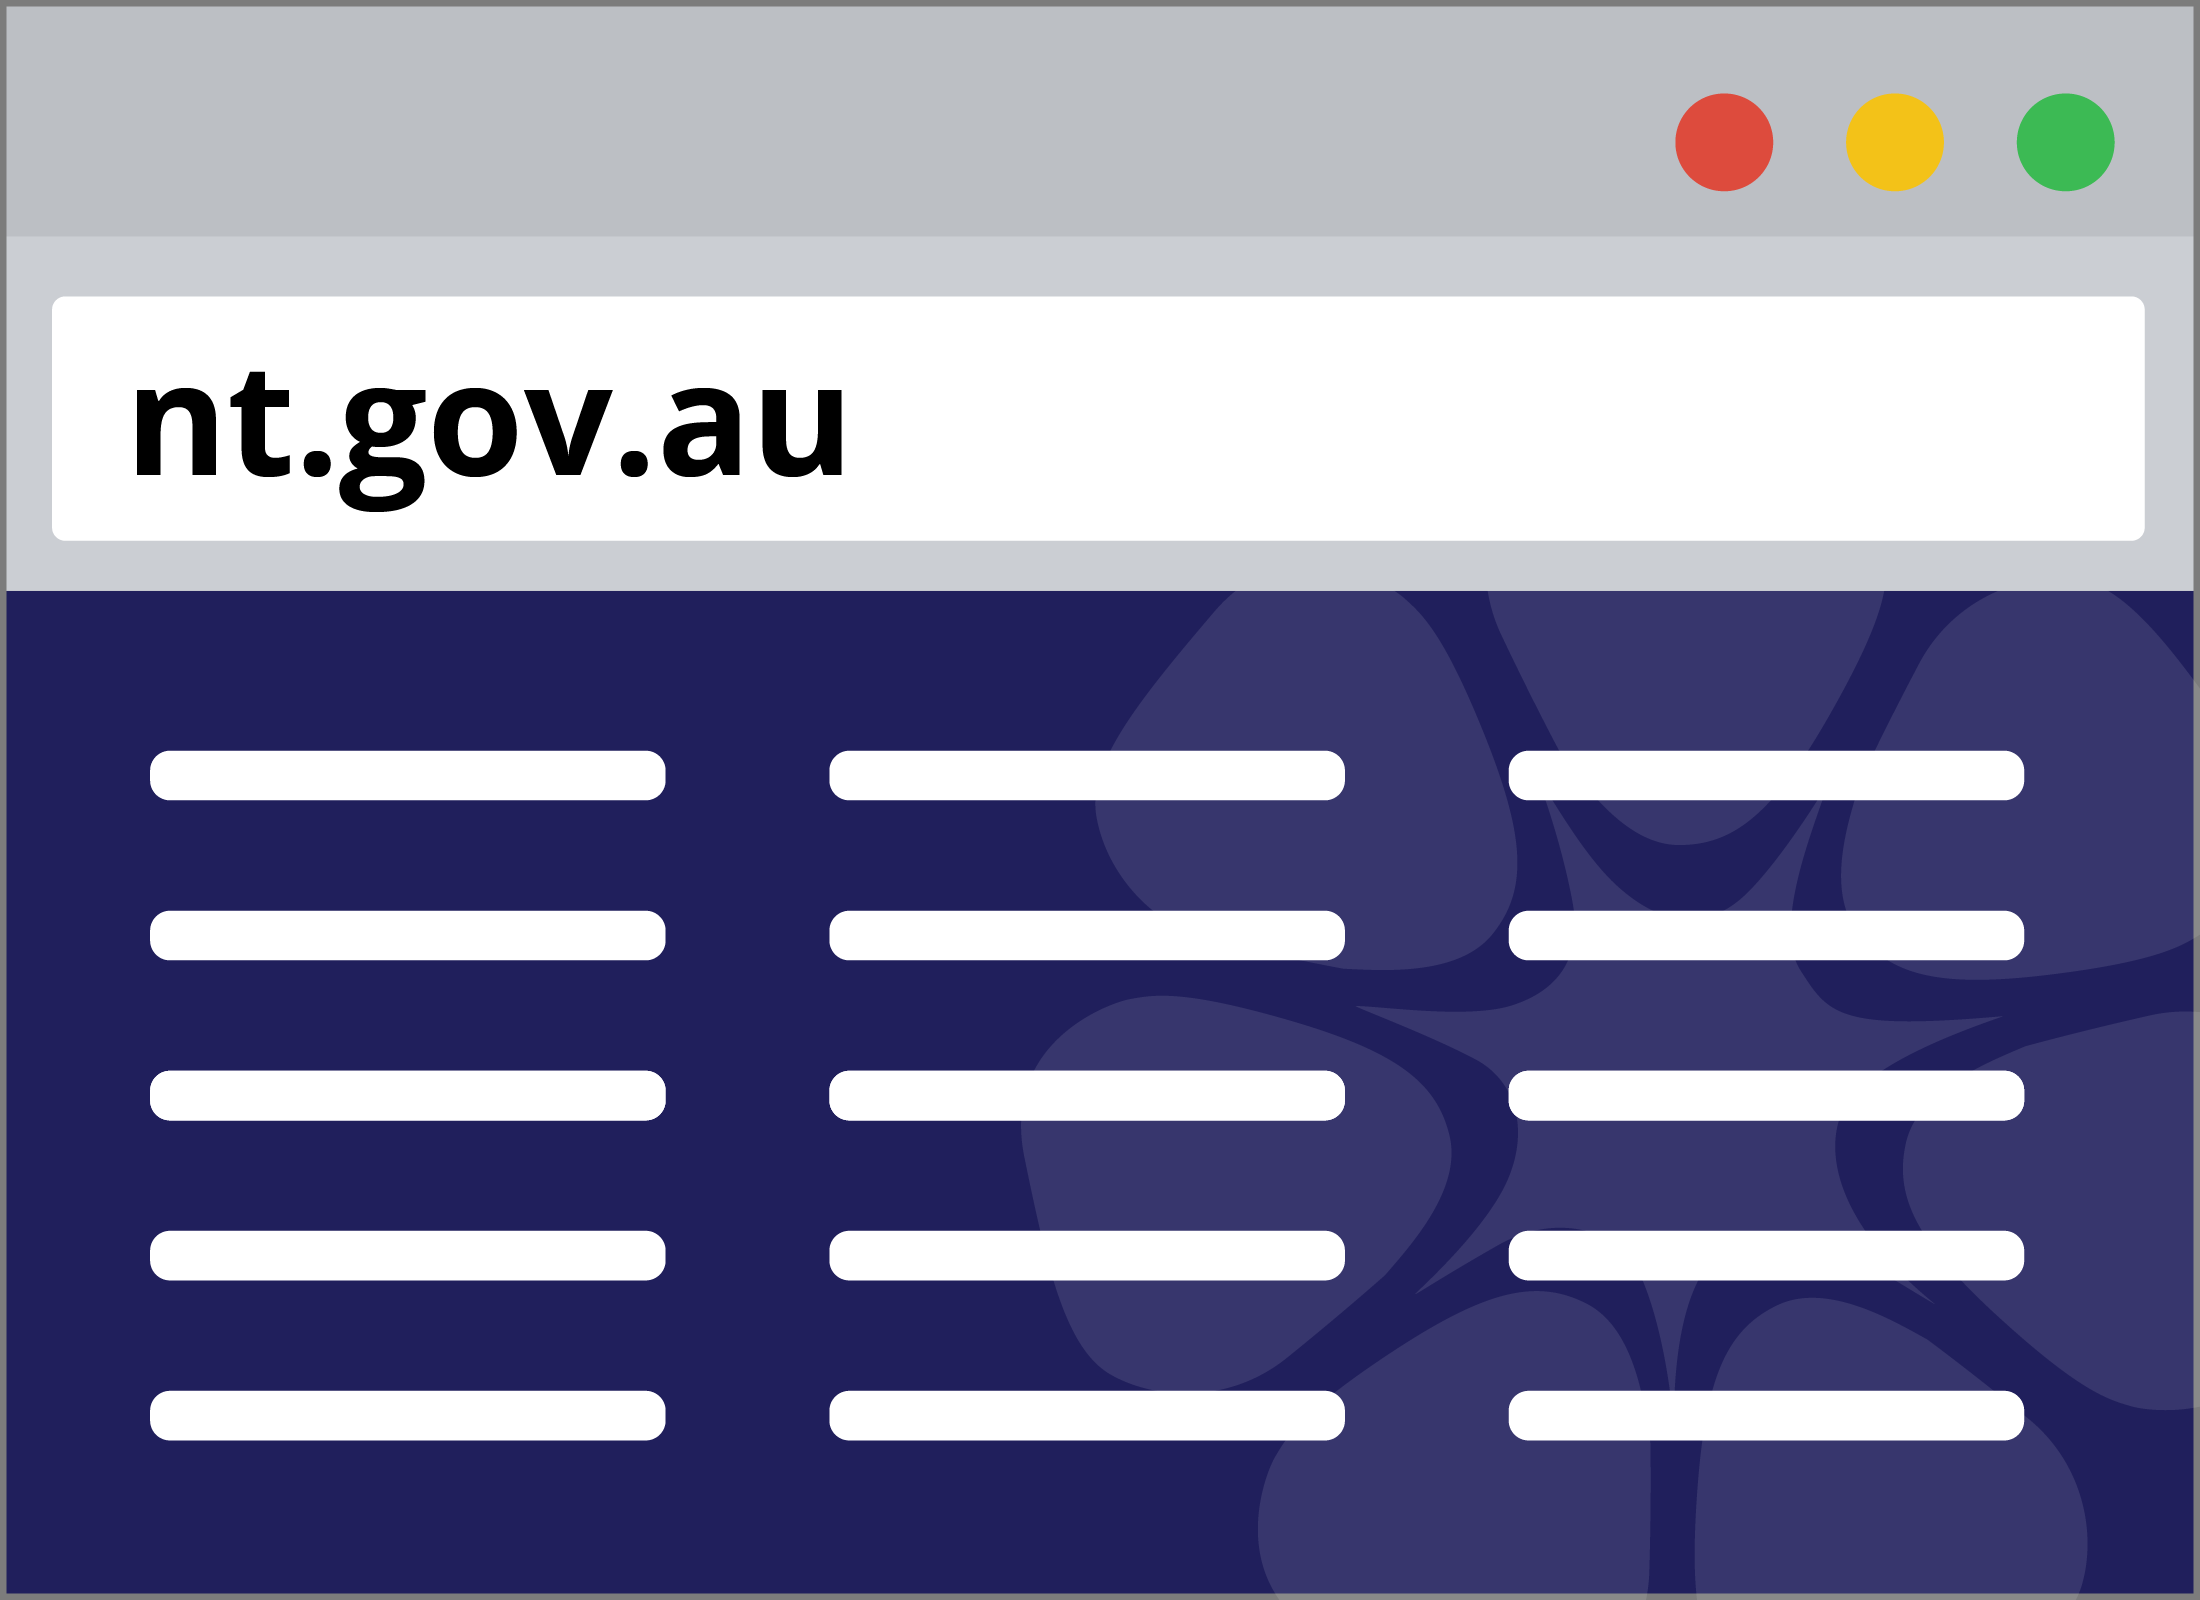 Northern Territory government websites